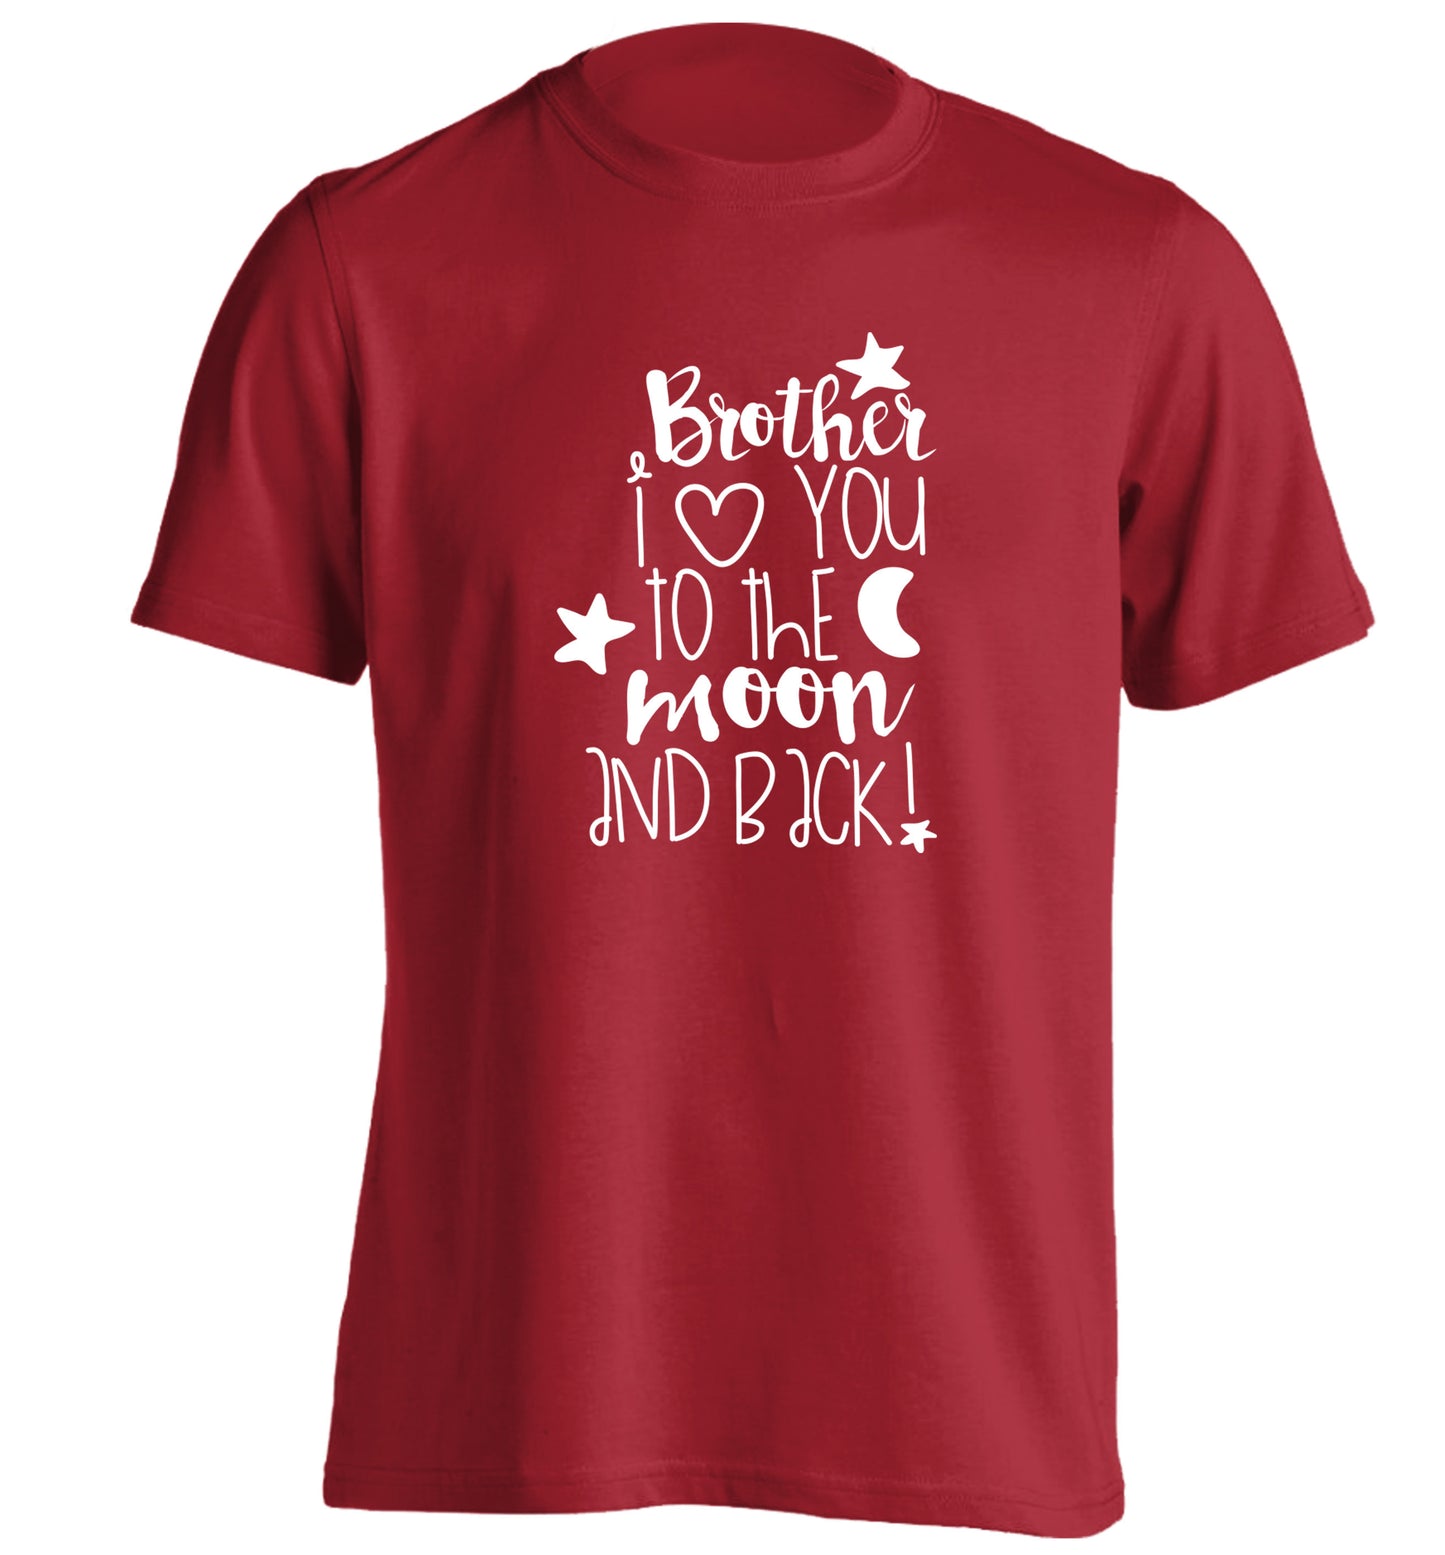 Brother I love you to the moon and back adults unisex red Tshirt 2XL